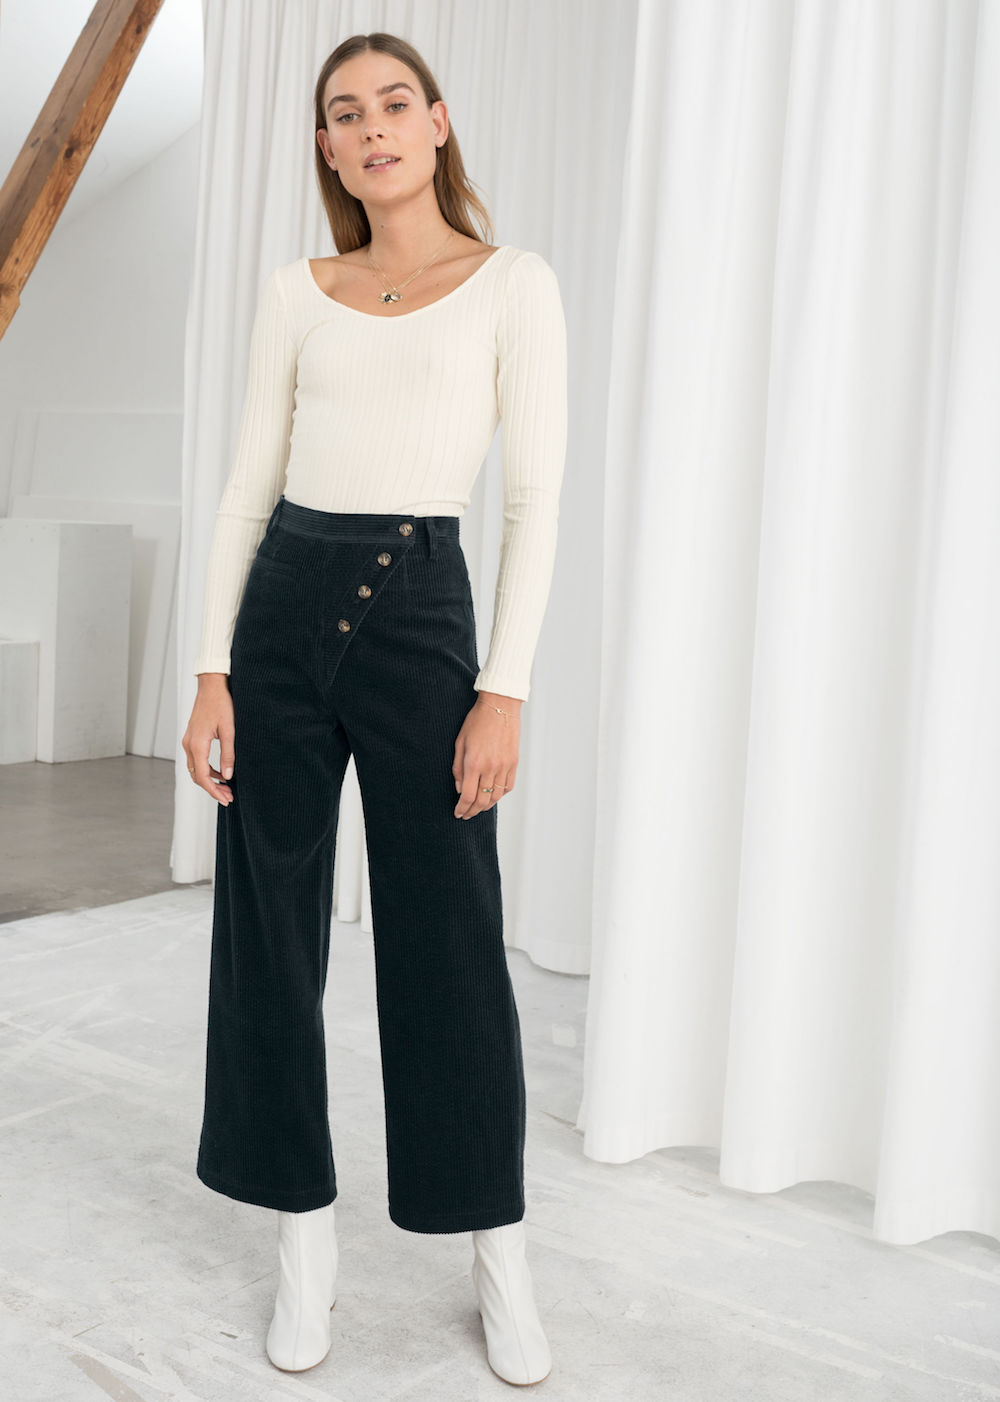 Button-Fly Pants Are the Big Wardrobe Update You Need - theFashionSpot